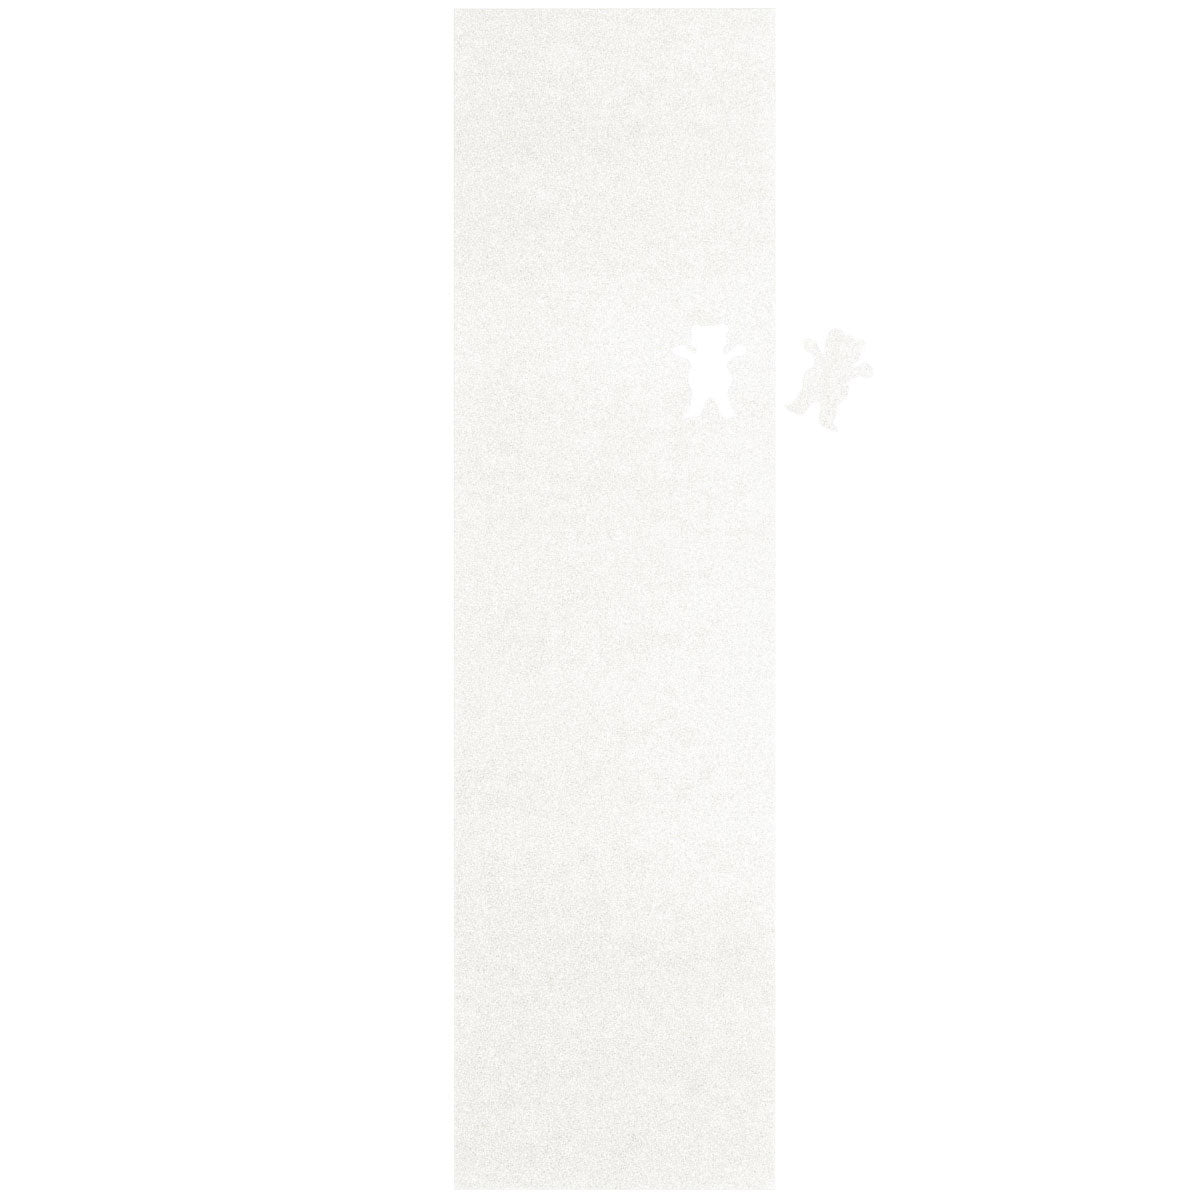 Grizzly Bear Cutout Regular Grip Tape - White image 1